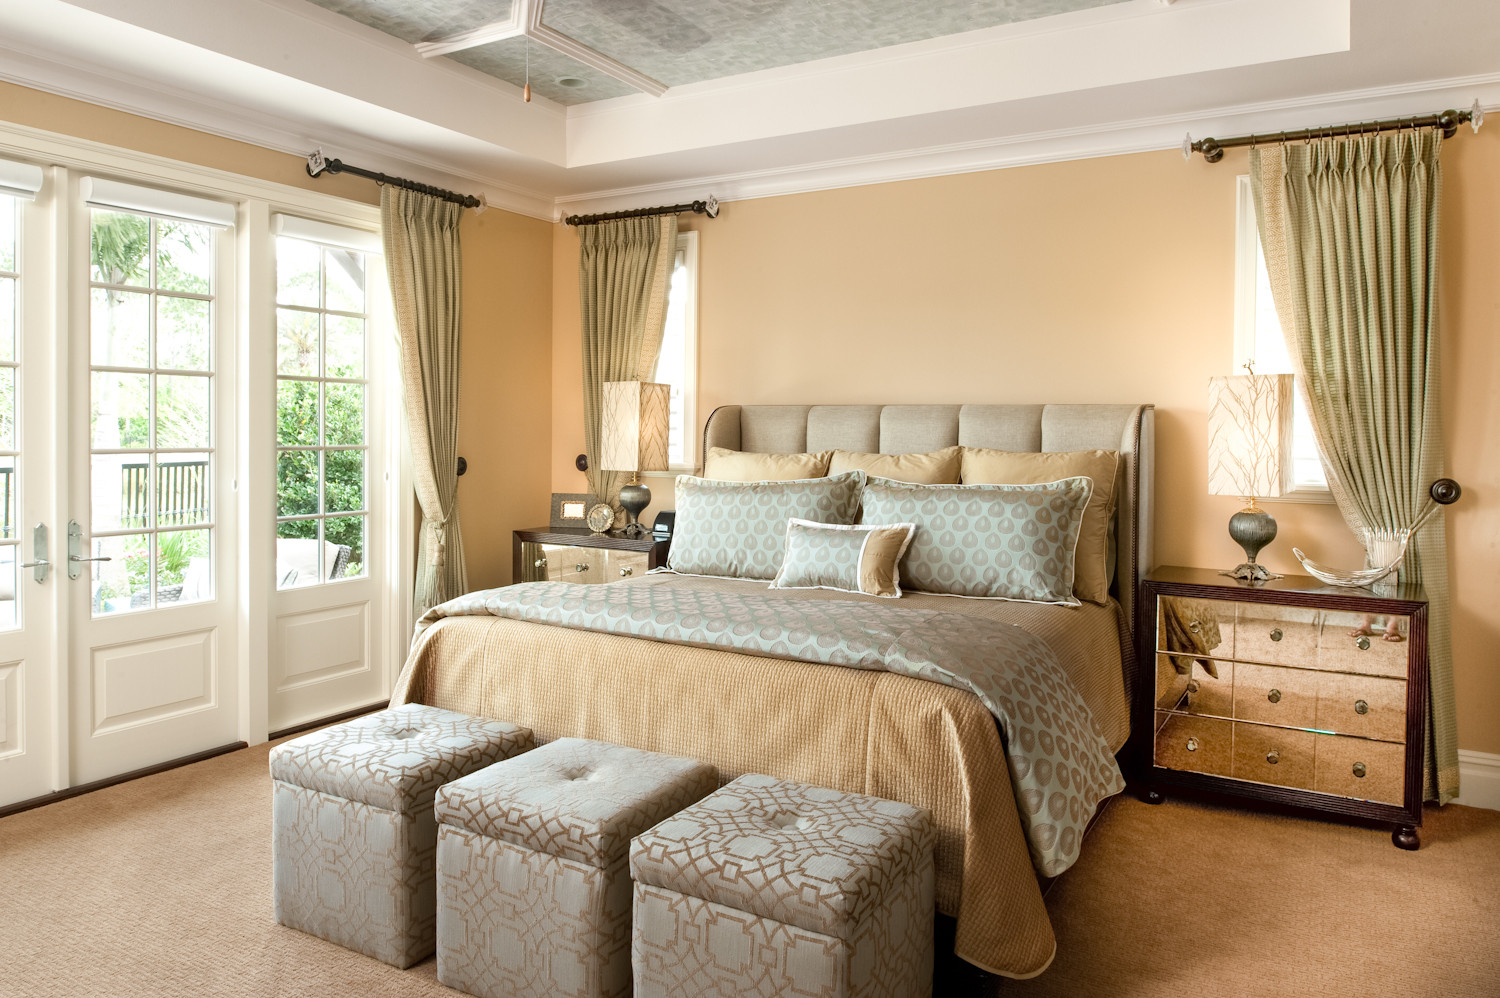 Master Bedroom Comforter Ideas
 45 Master Bedroom Ideas For Your Home – The WoW Style